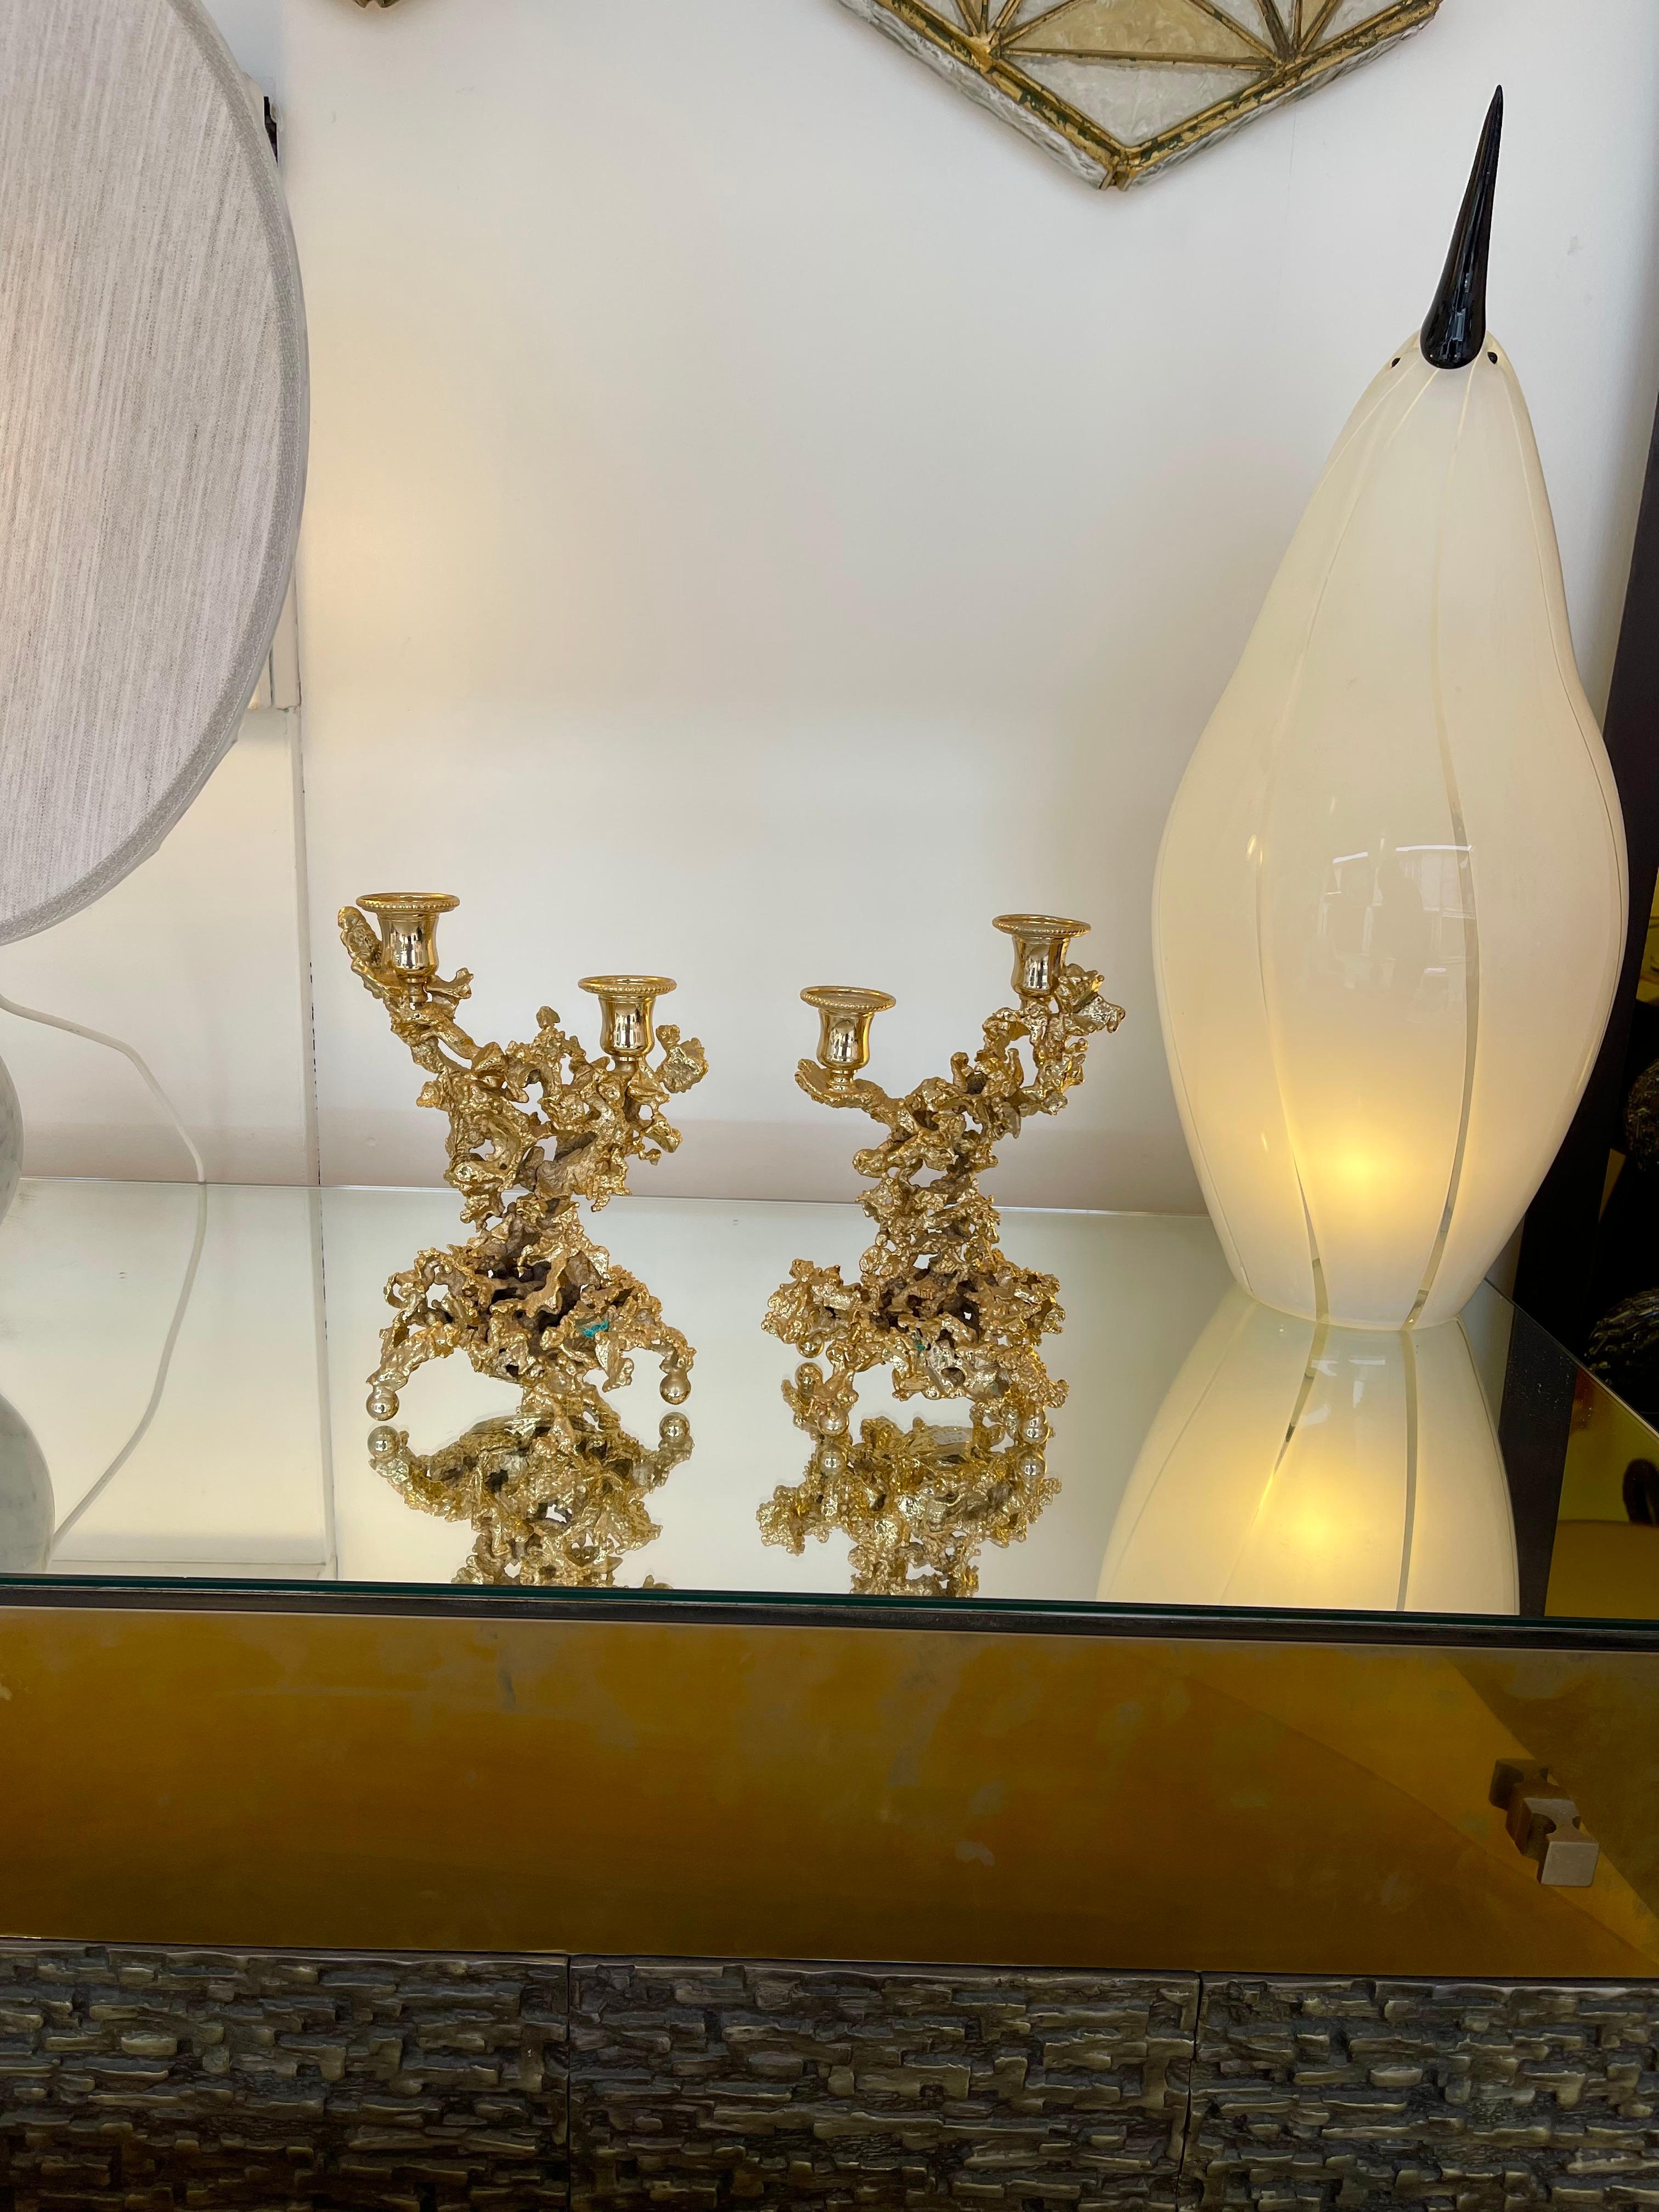 Pair of Candlesticks or Candle holders in gilt bronze, partial piece of Dioptase stone by the french artist Claude Victor Boeltz. Famous design like Jacques Duval Brasseur, Philippe Jean, Alain Chervet, Maison Jansen, Charles, Italian designer